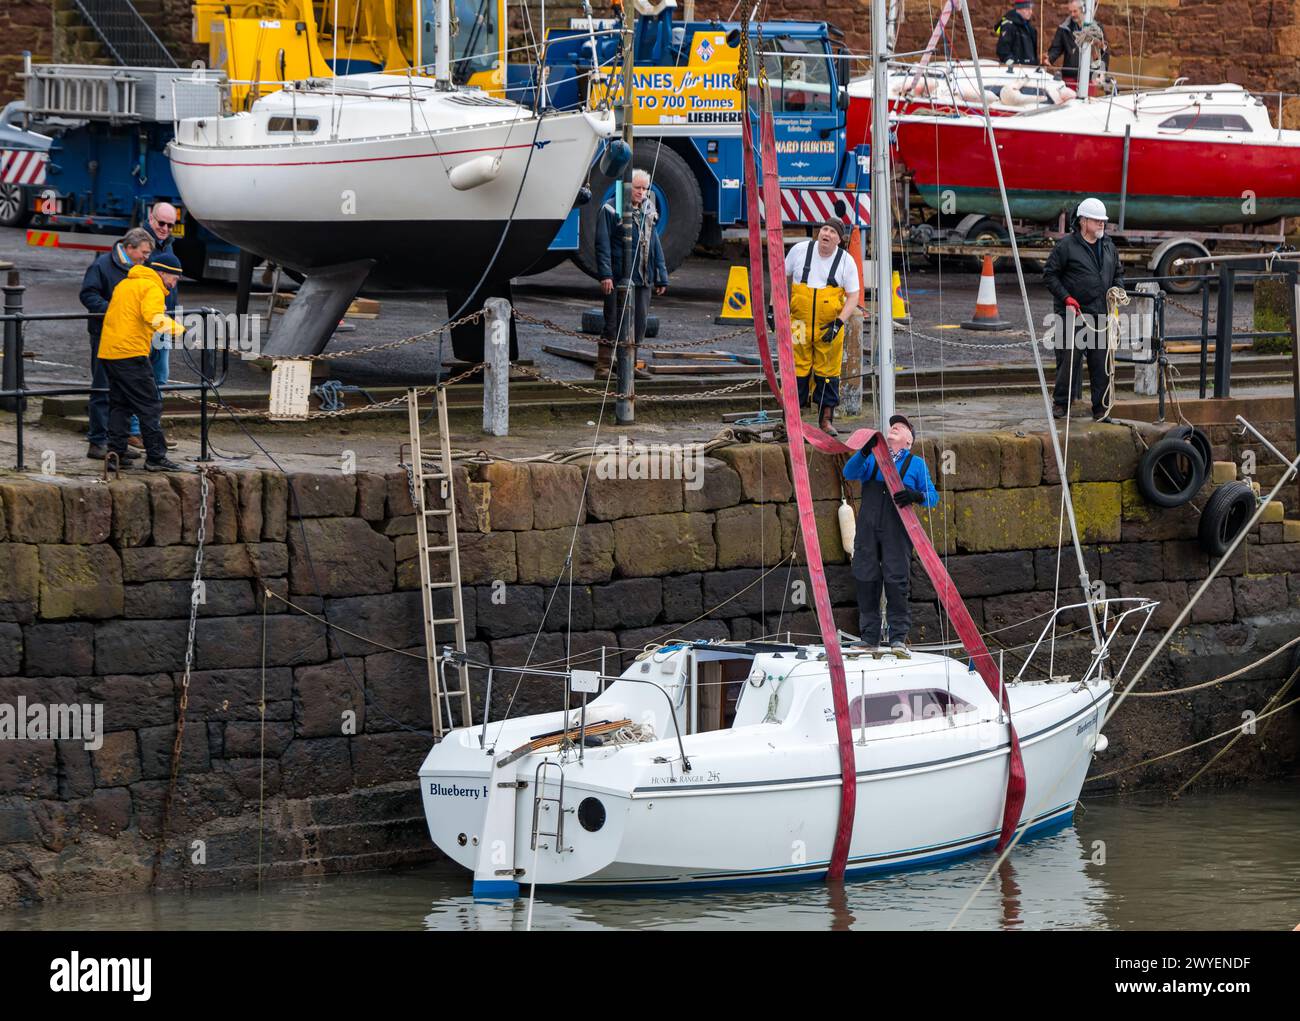 North Berwick harbour, East Lothian, Scotland, UK, 6th April 2024. Yachts into water: the annual event of organising a crane to lift over 20 sailing boats into the water for the Summer season takes place today. Credit: Sally Anderson/Alamy Live News Stock Photo